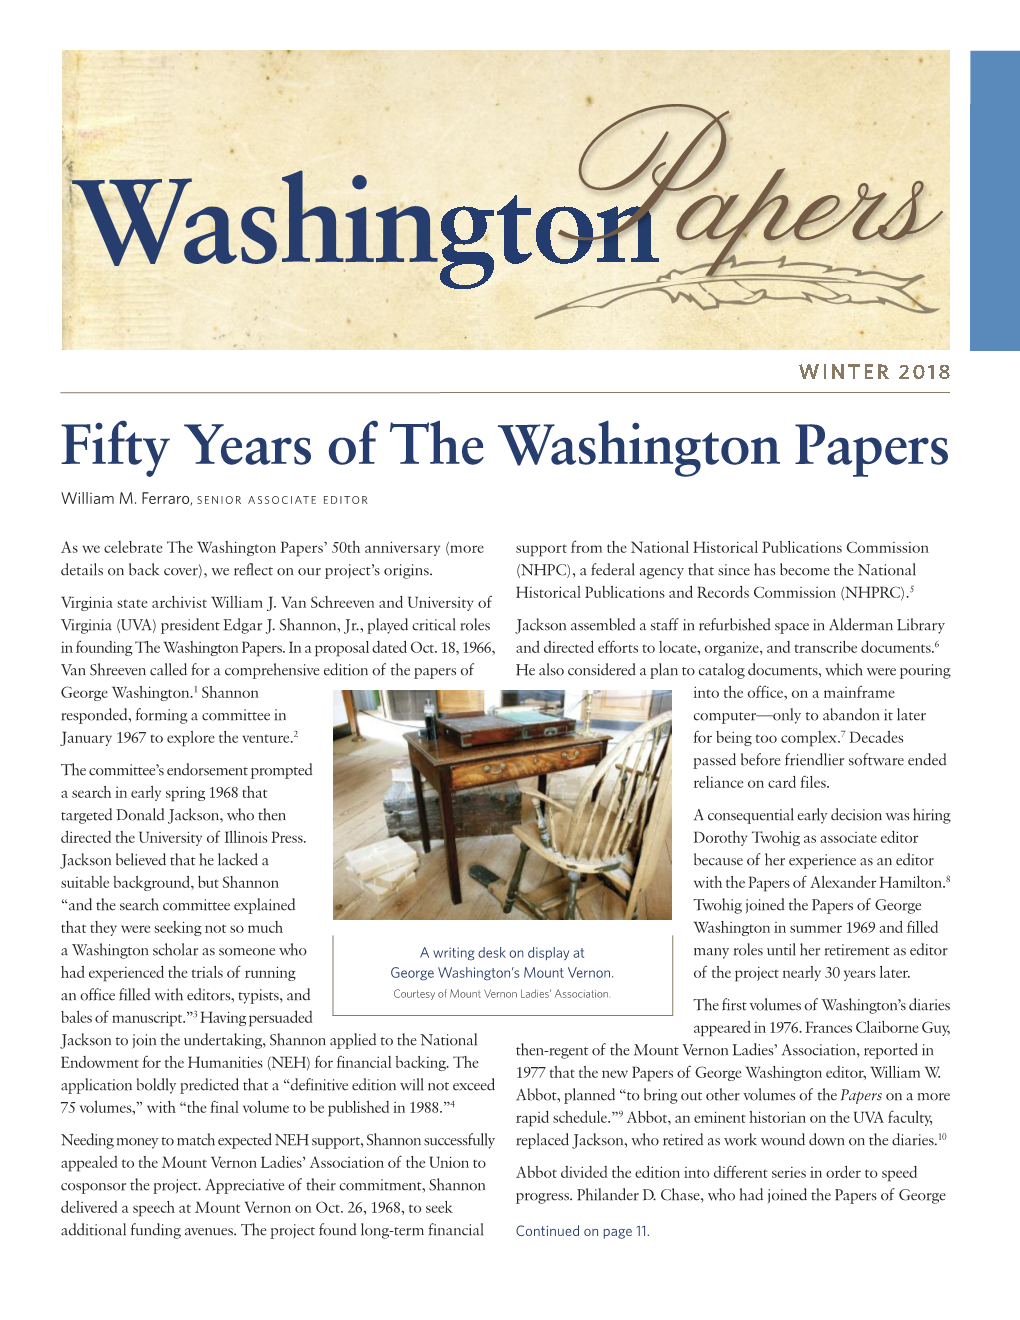 Fifty Years of the Washington Papers